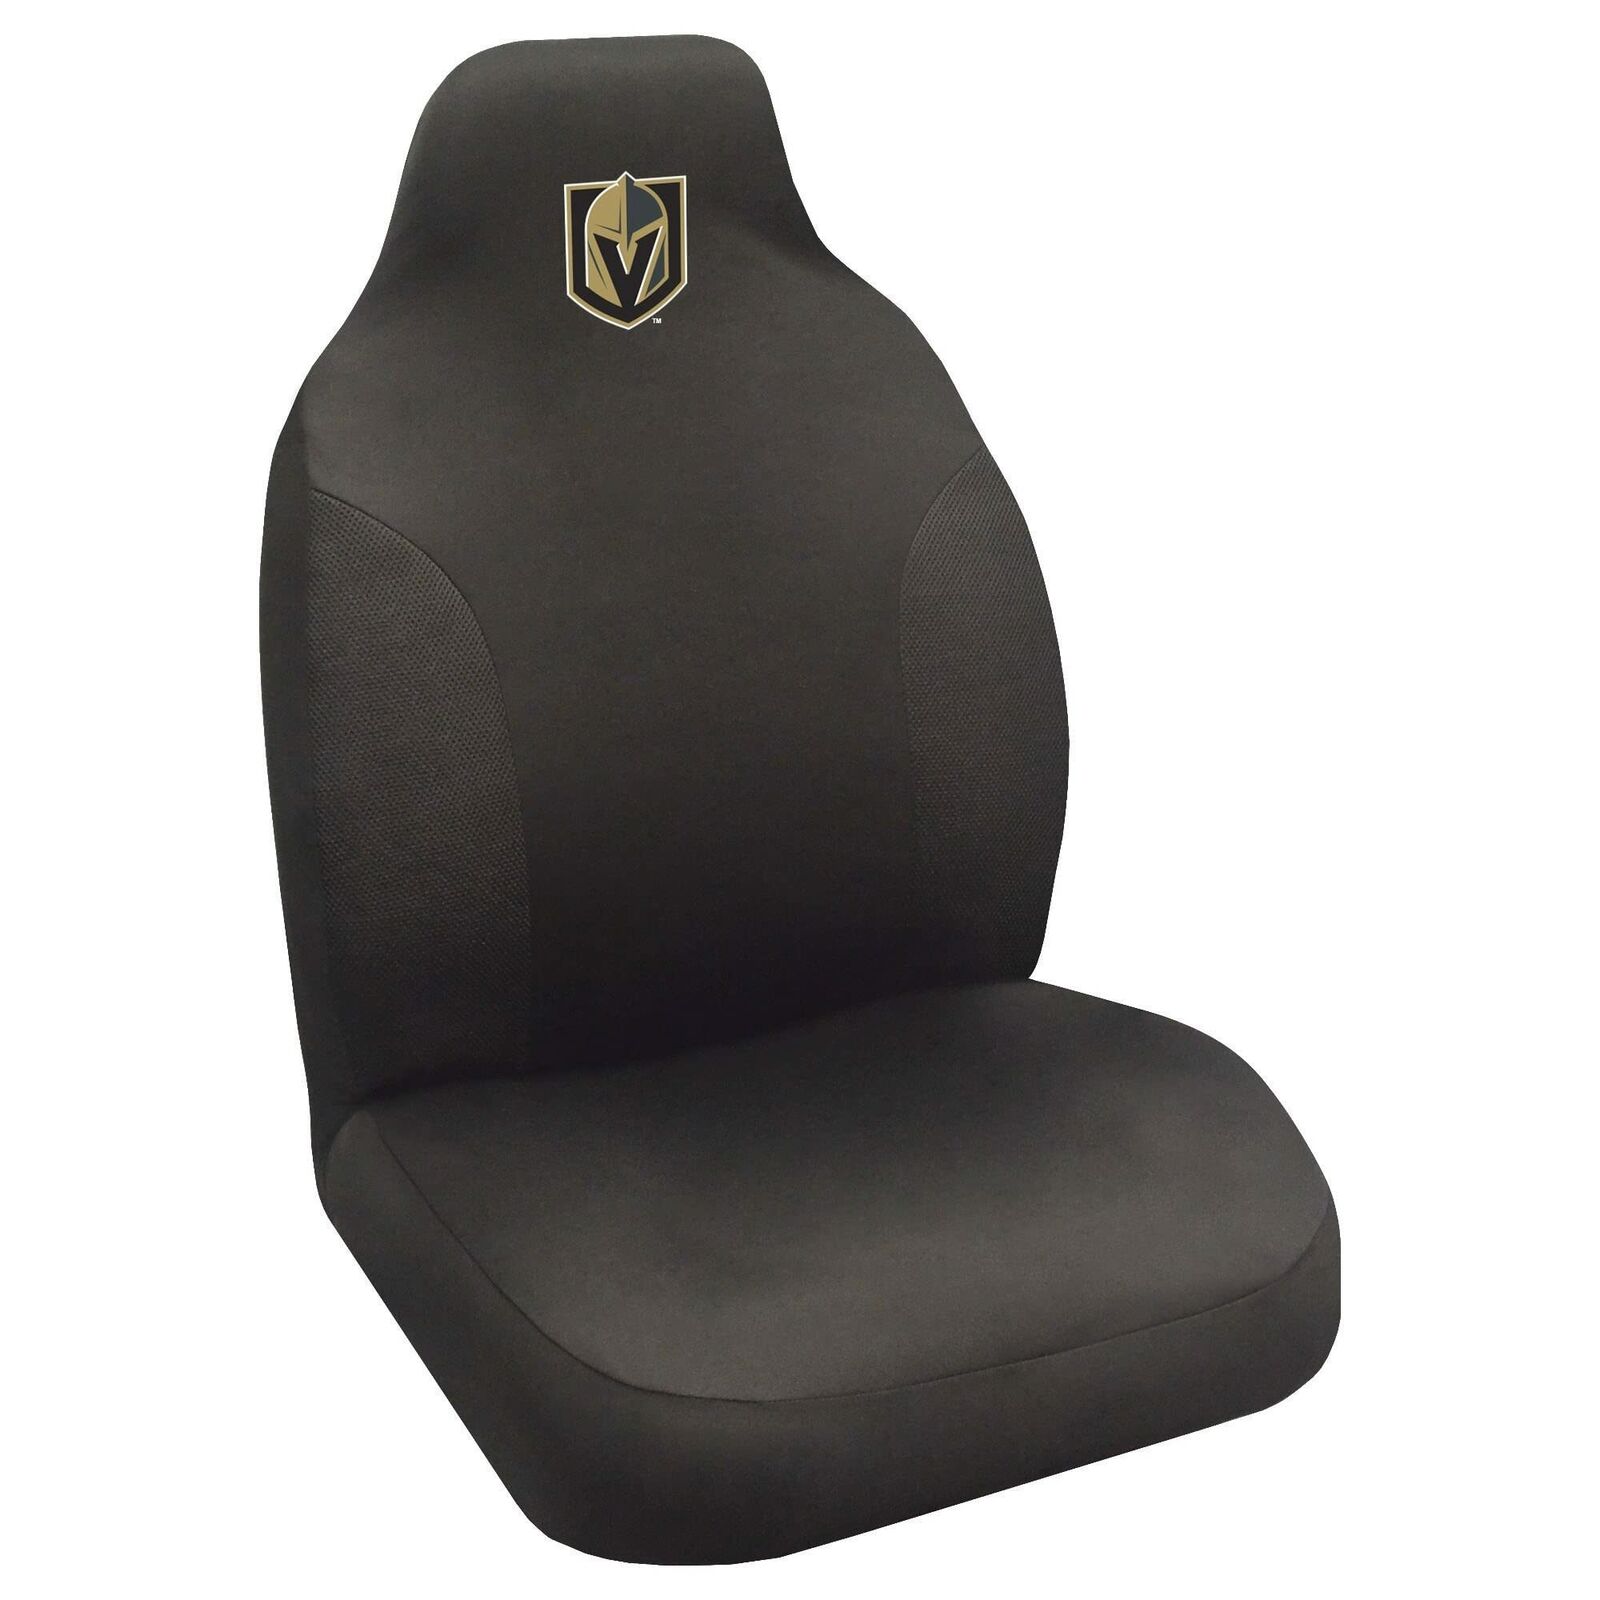 FANMATS 24559 Vegas Golden Knights Embroidered Seat Cover